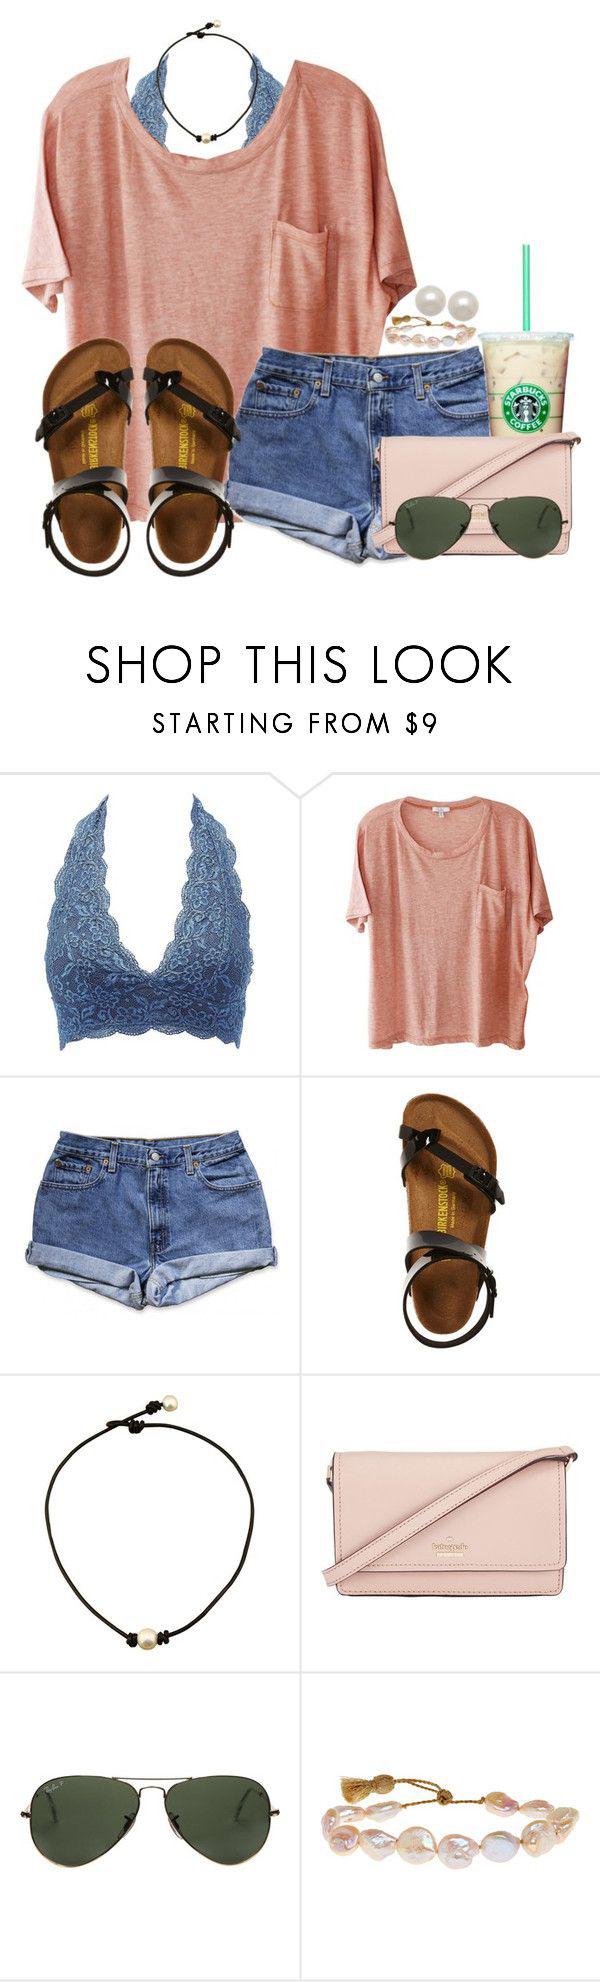 Back to school outfits: “RTD!” by annaewakefield liked on Polyvore ...